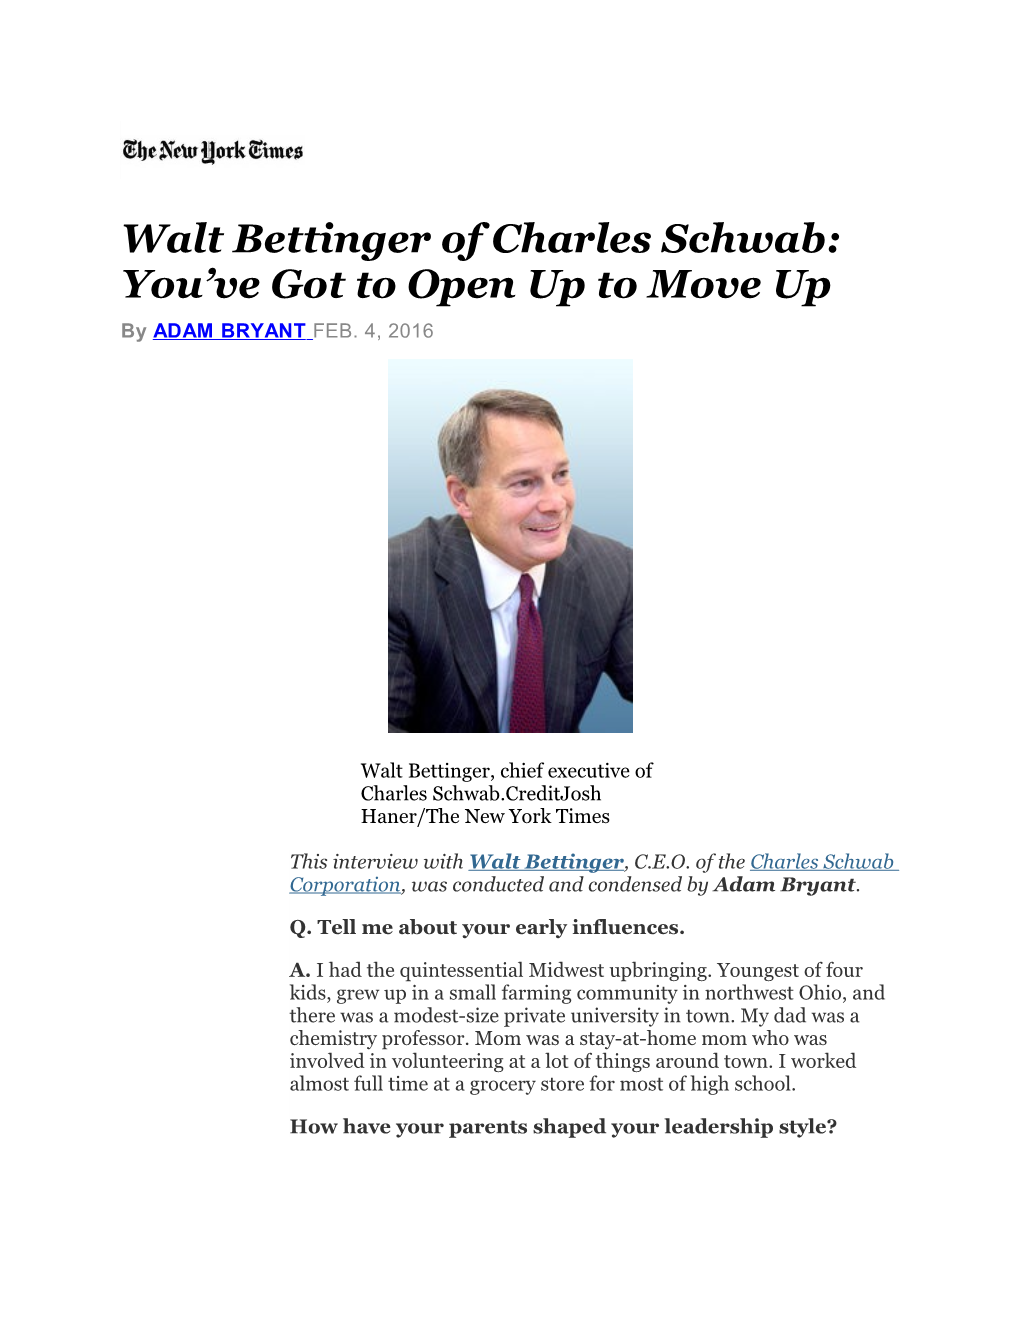 Walt Bettinger of Charles Schwab: You Ve Got to Open up to Move Up